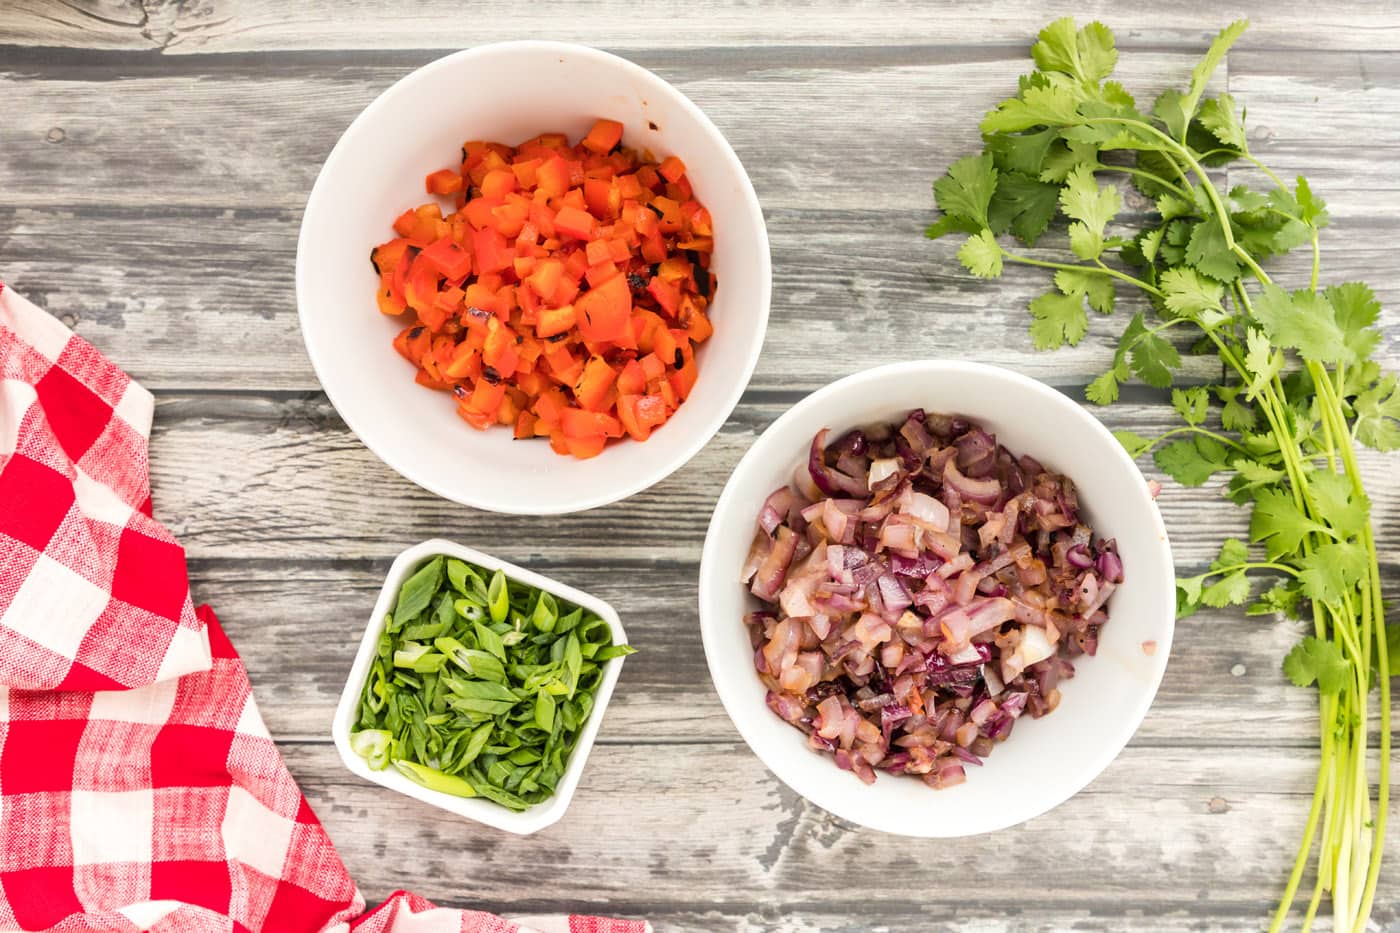 red bell pepper, red onion, and green onion diced in bowls